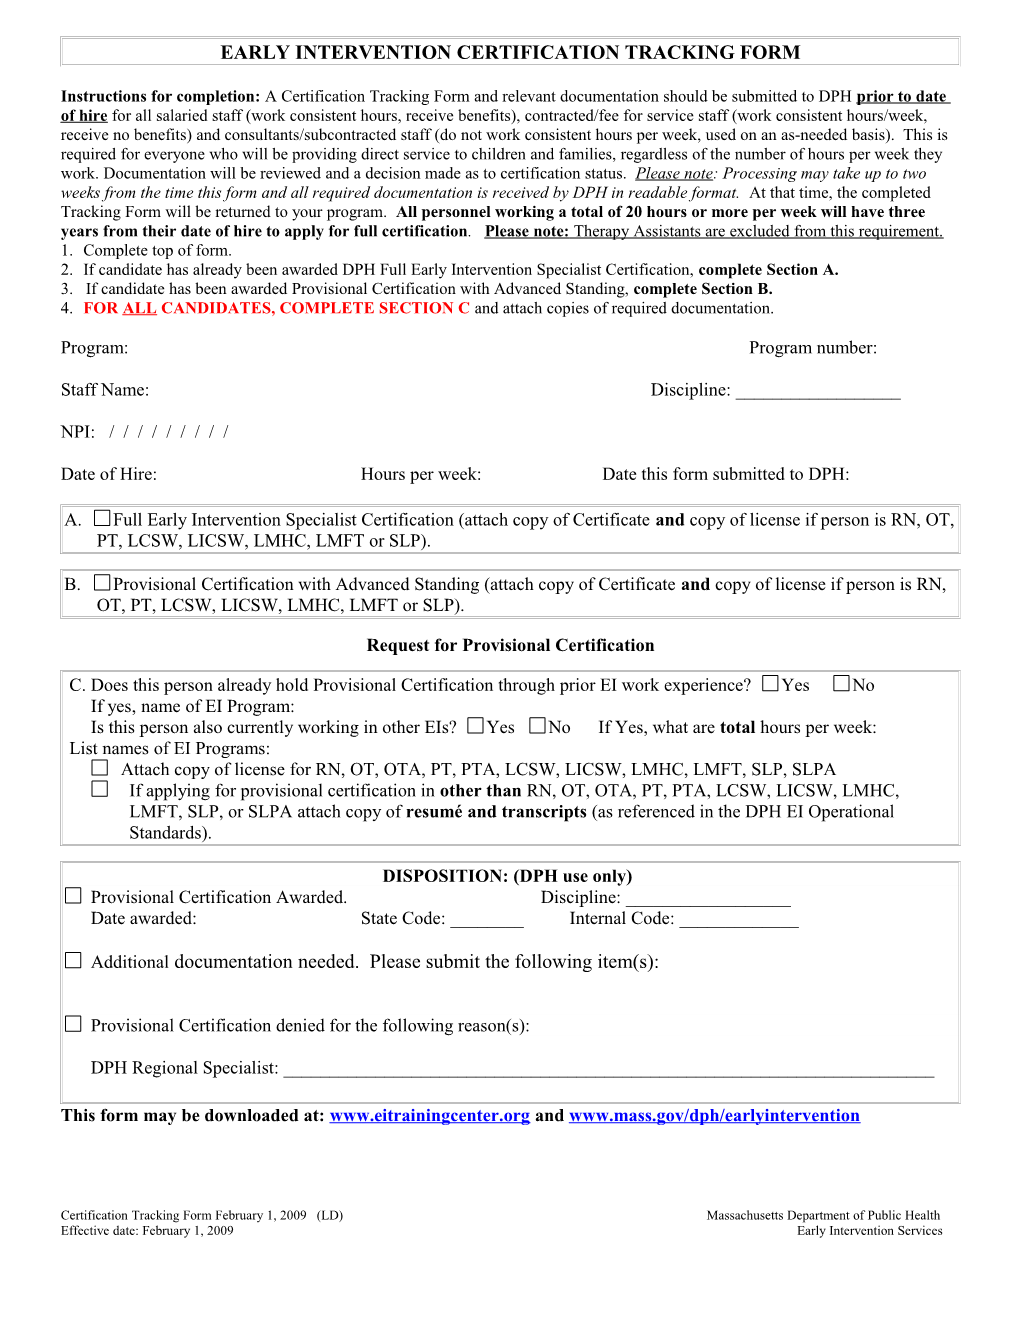 Early Intervention Certification Tracking Form